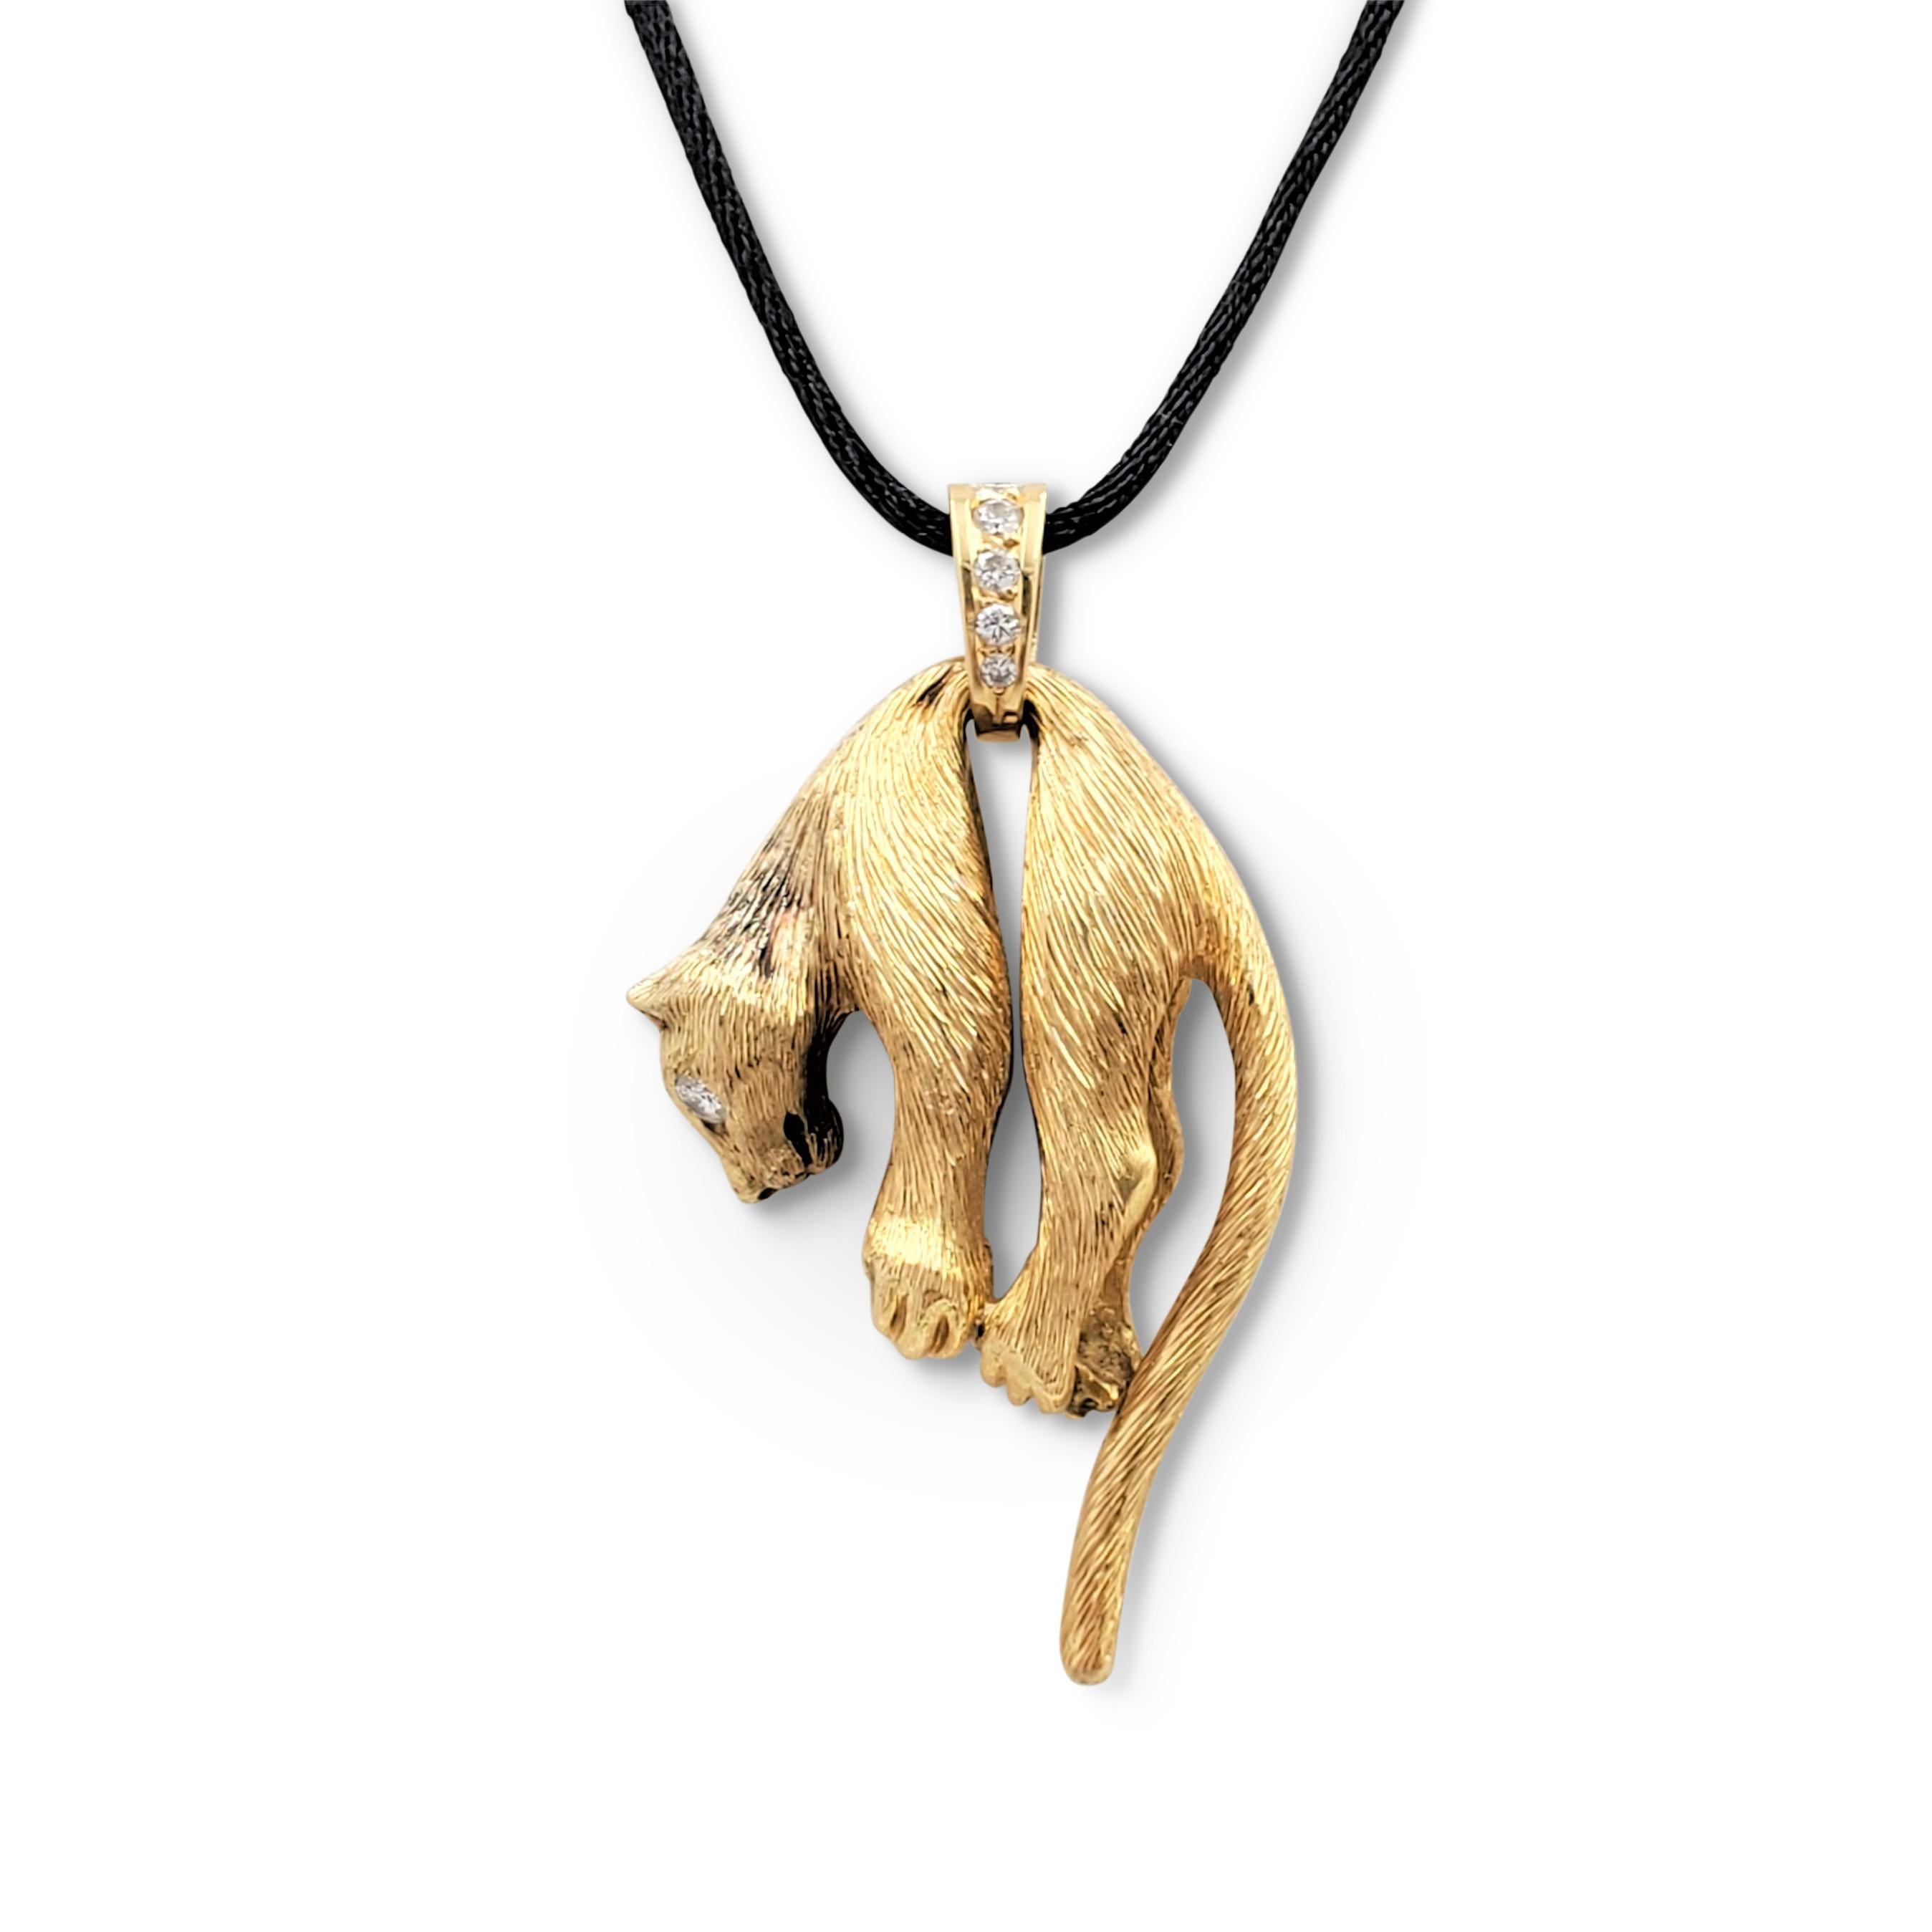 Crafted in 18k brushed gold, the pendant depicts a panther with round brilliant cut diamond eyes weighing an estimated 0.15 carats (F, VS). The gold bail is accented with an additional 0.20 carats of round brilliant diamonds. Patina consistent with